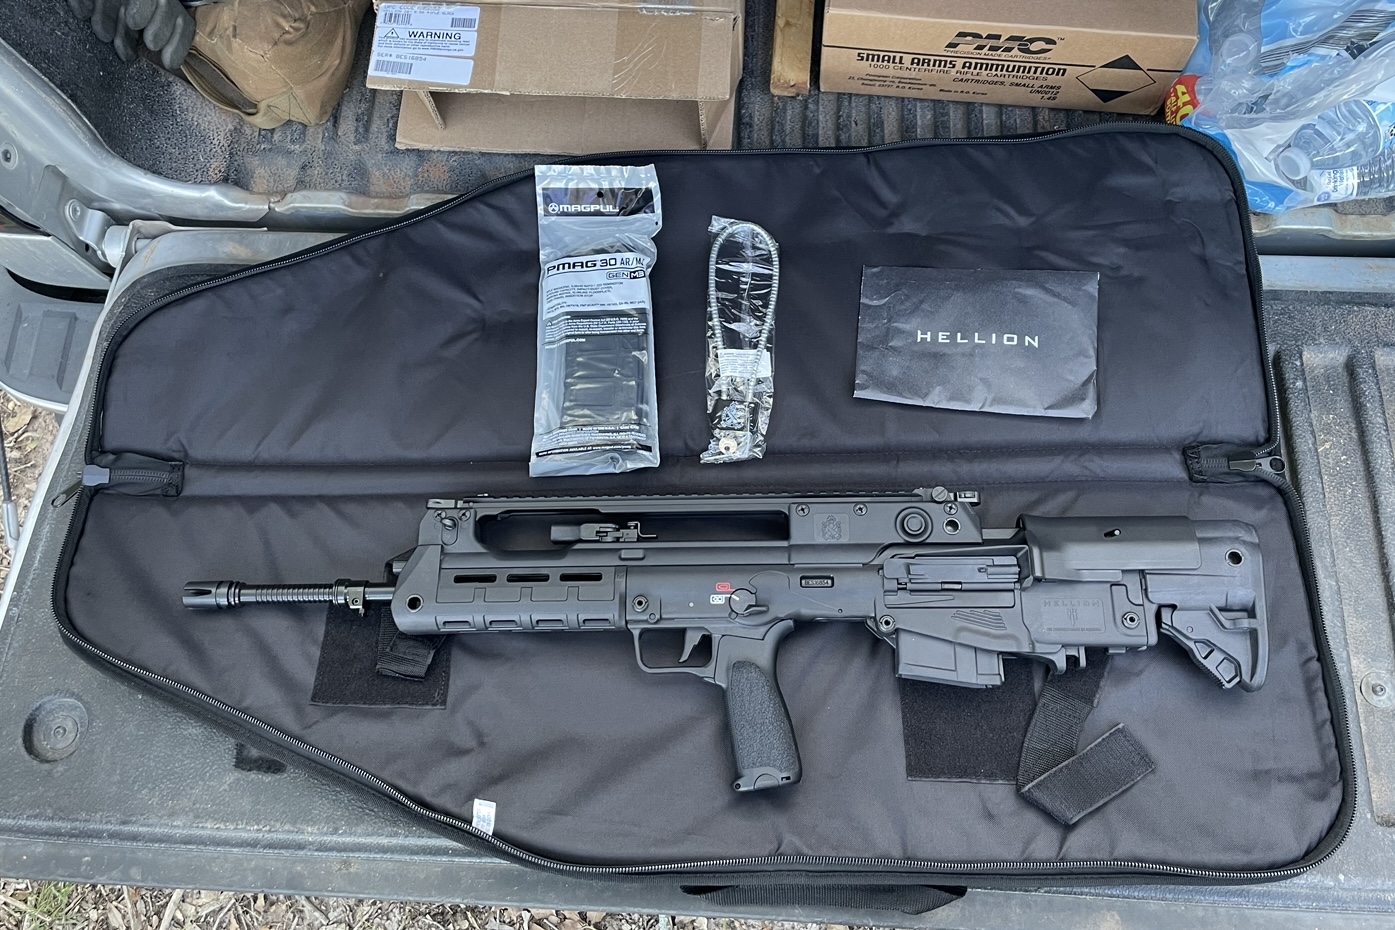 Springfield Armory Hellion with included accessories